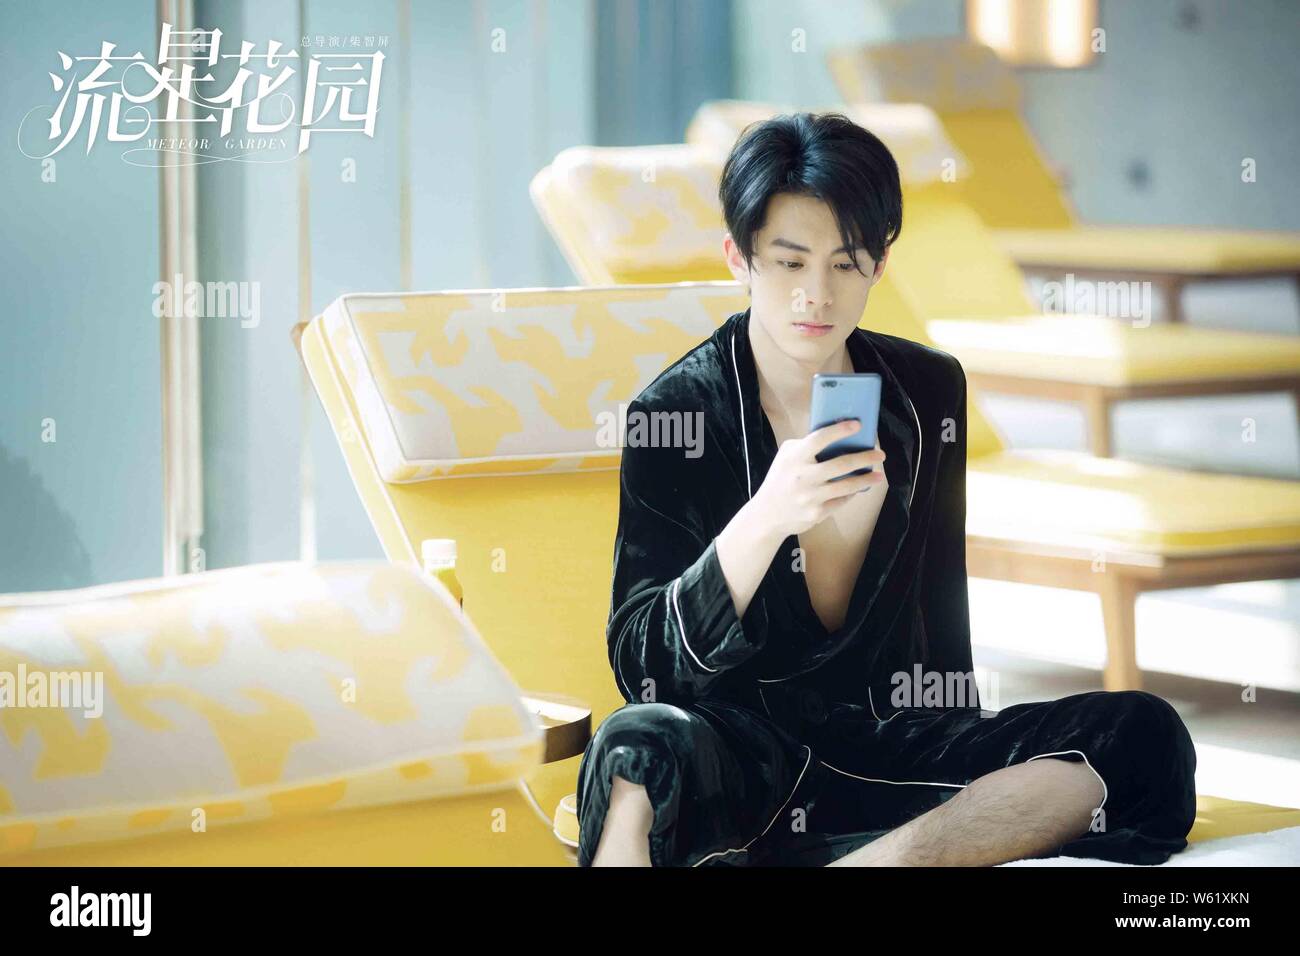 This Pr Handout Picture Shows A Still Of The Tv Series Meteor Garden Also Known As The New Meteor Garden Featuring Actor Dylan Wang Hedi Of The Ne Stock Photo Alamy